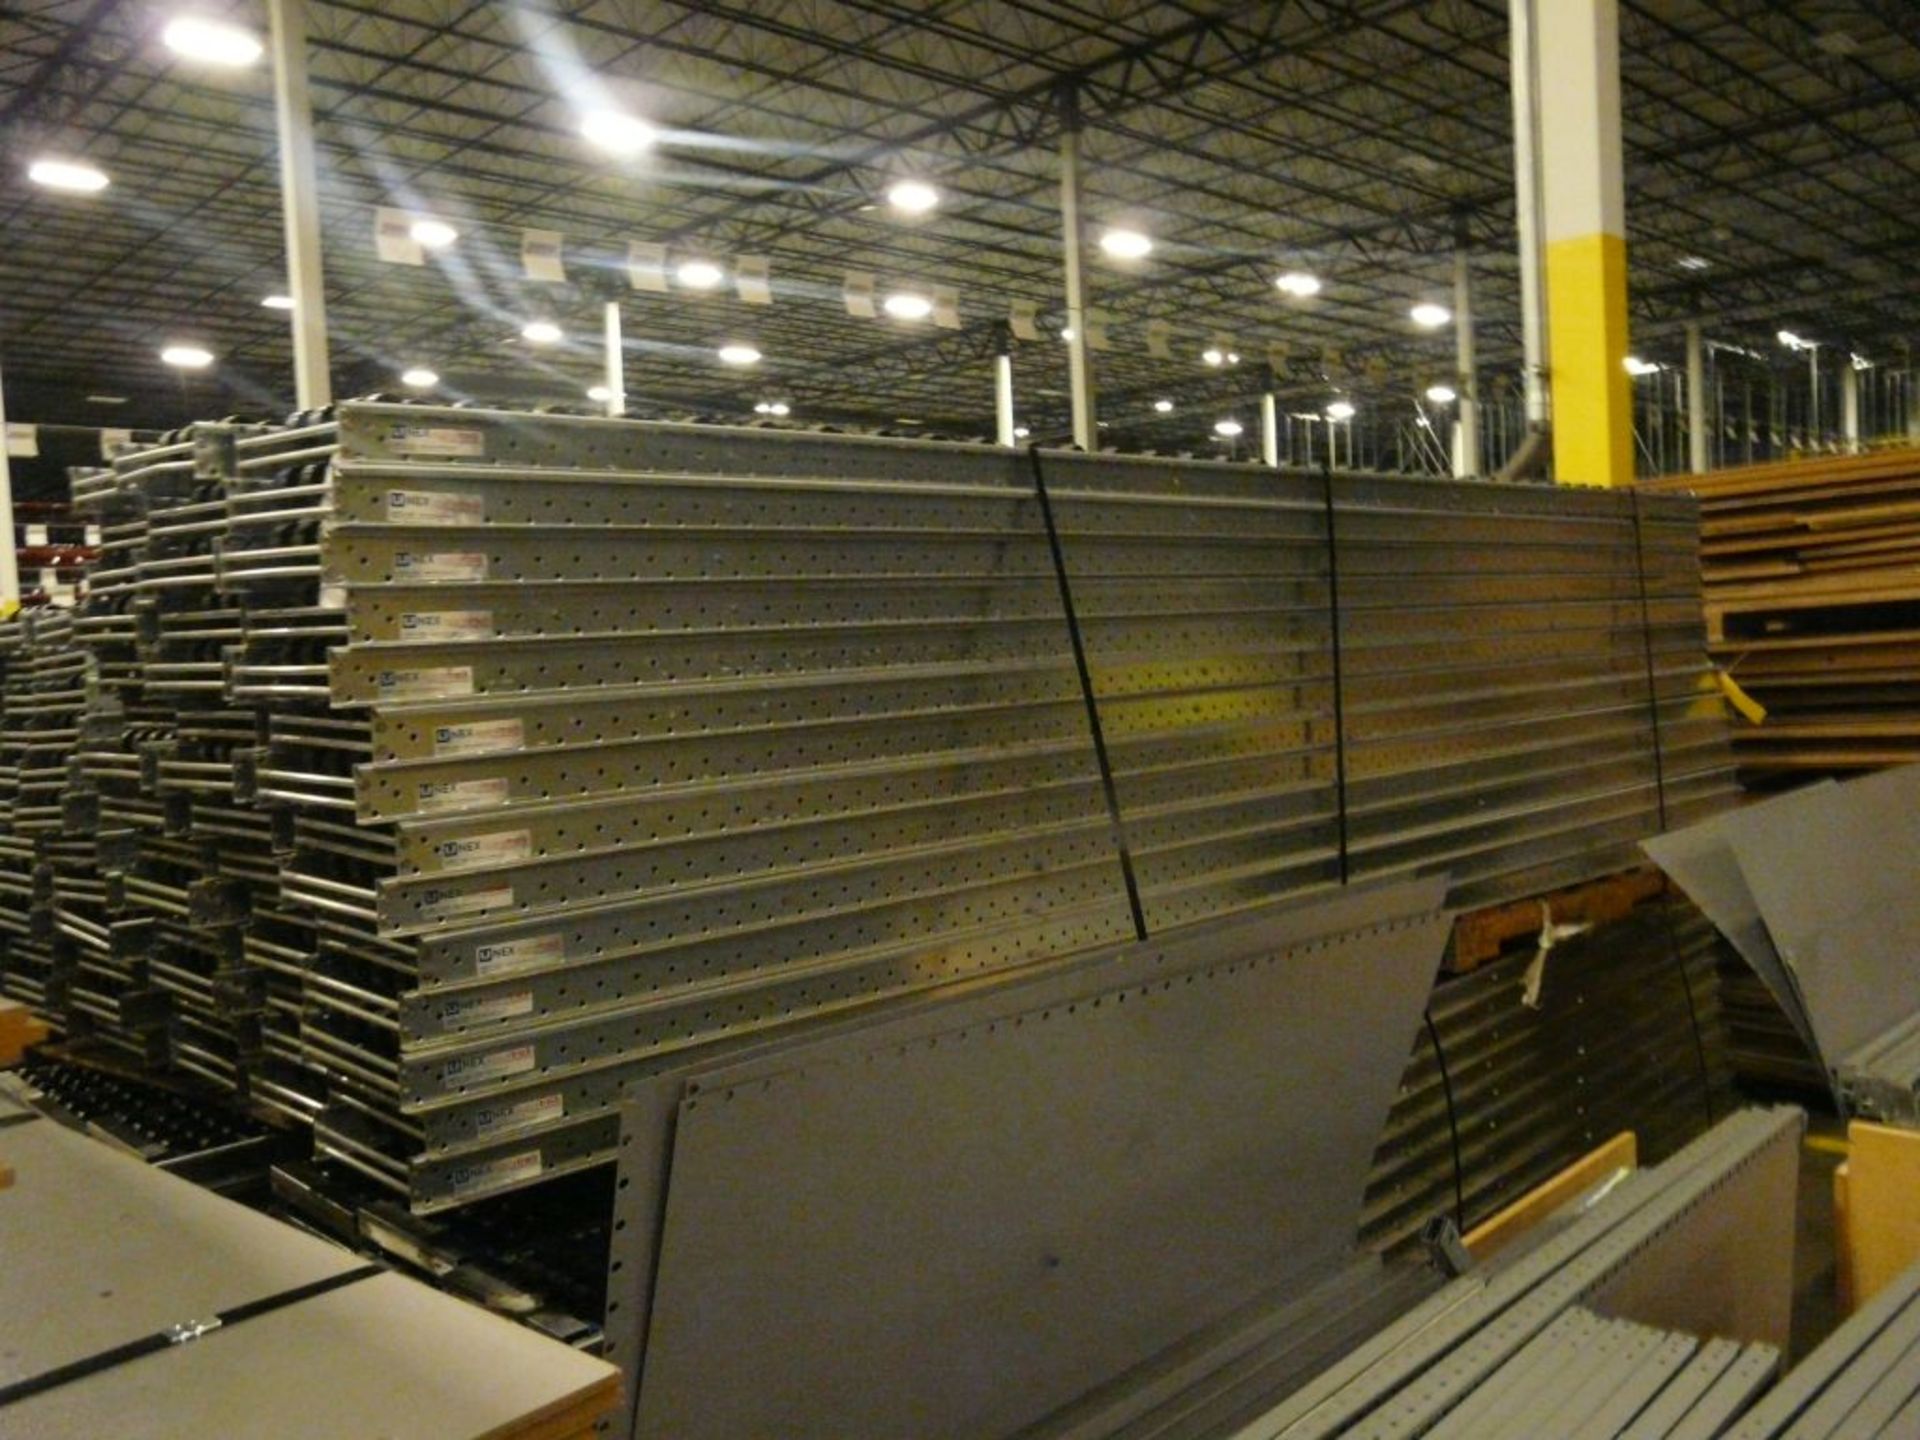 Lot of (42) SpanTrack Wheelbed Carton Flow Conveyors - 153"L x 10"W; Tag: 223727 - $30 Lot Loading - Image 3 of 4